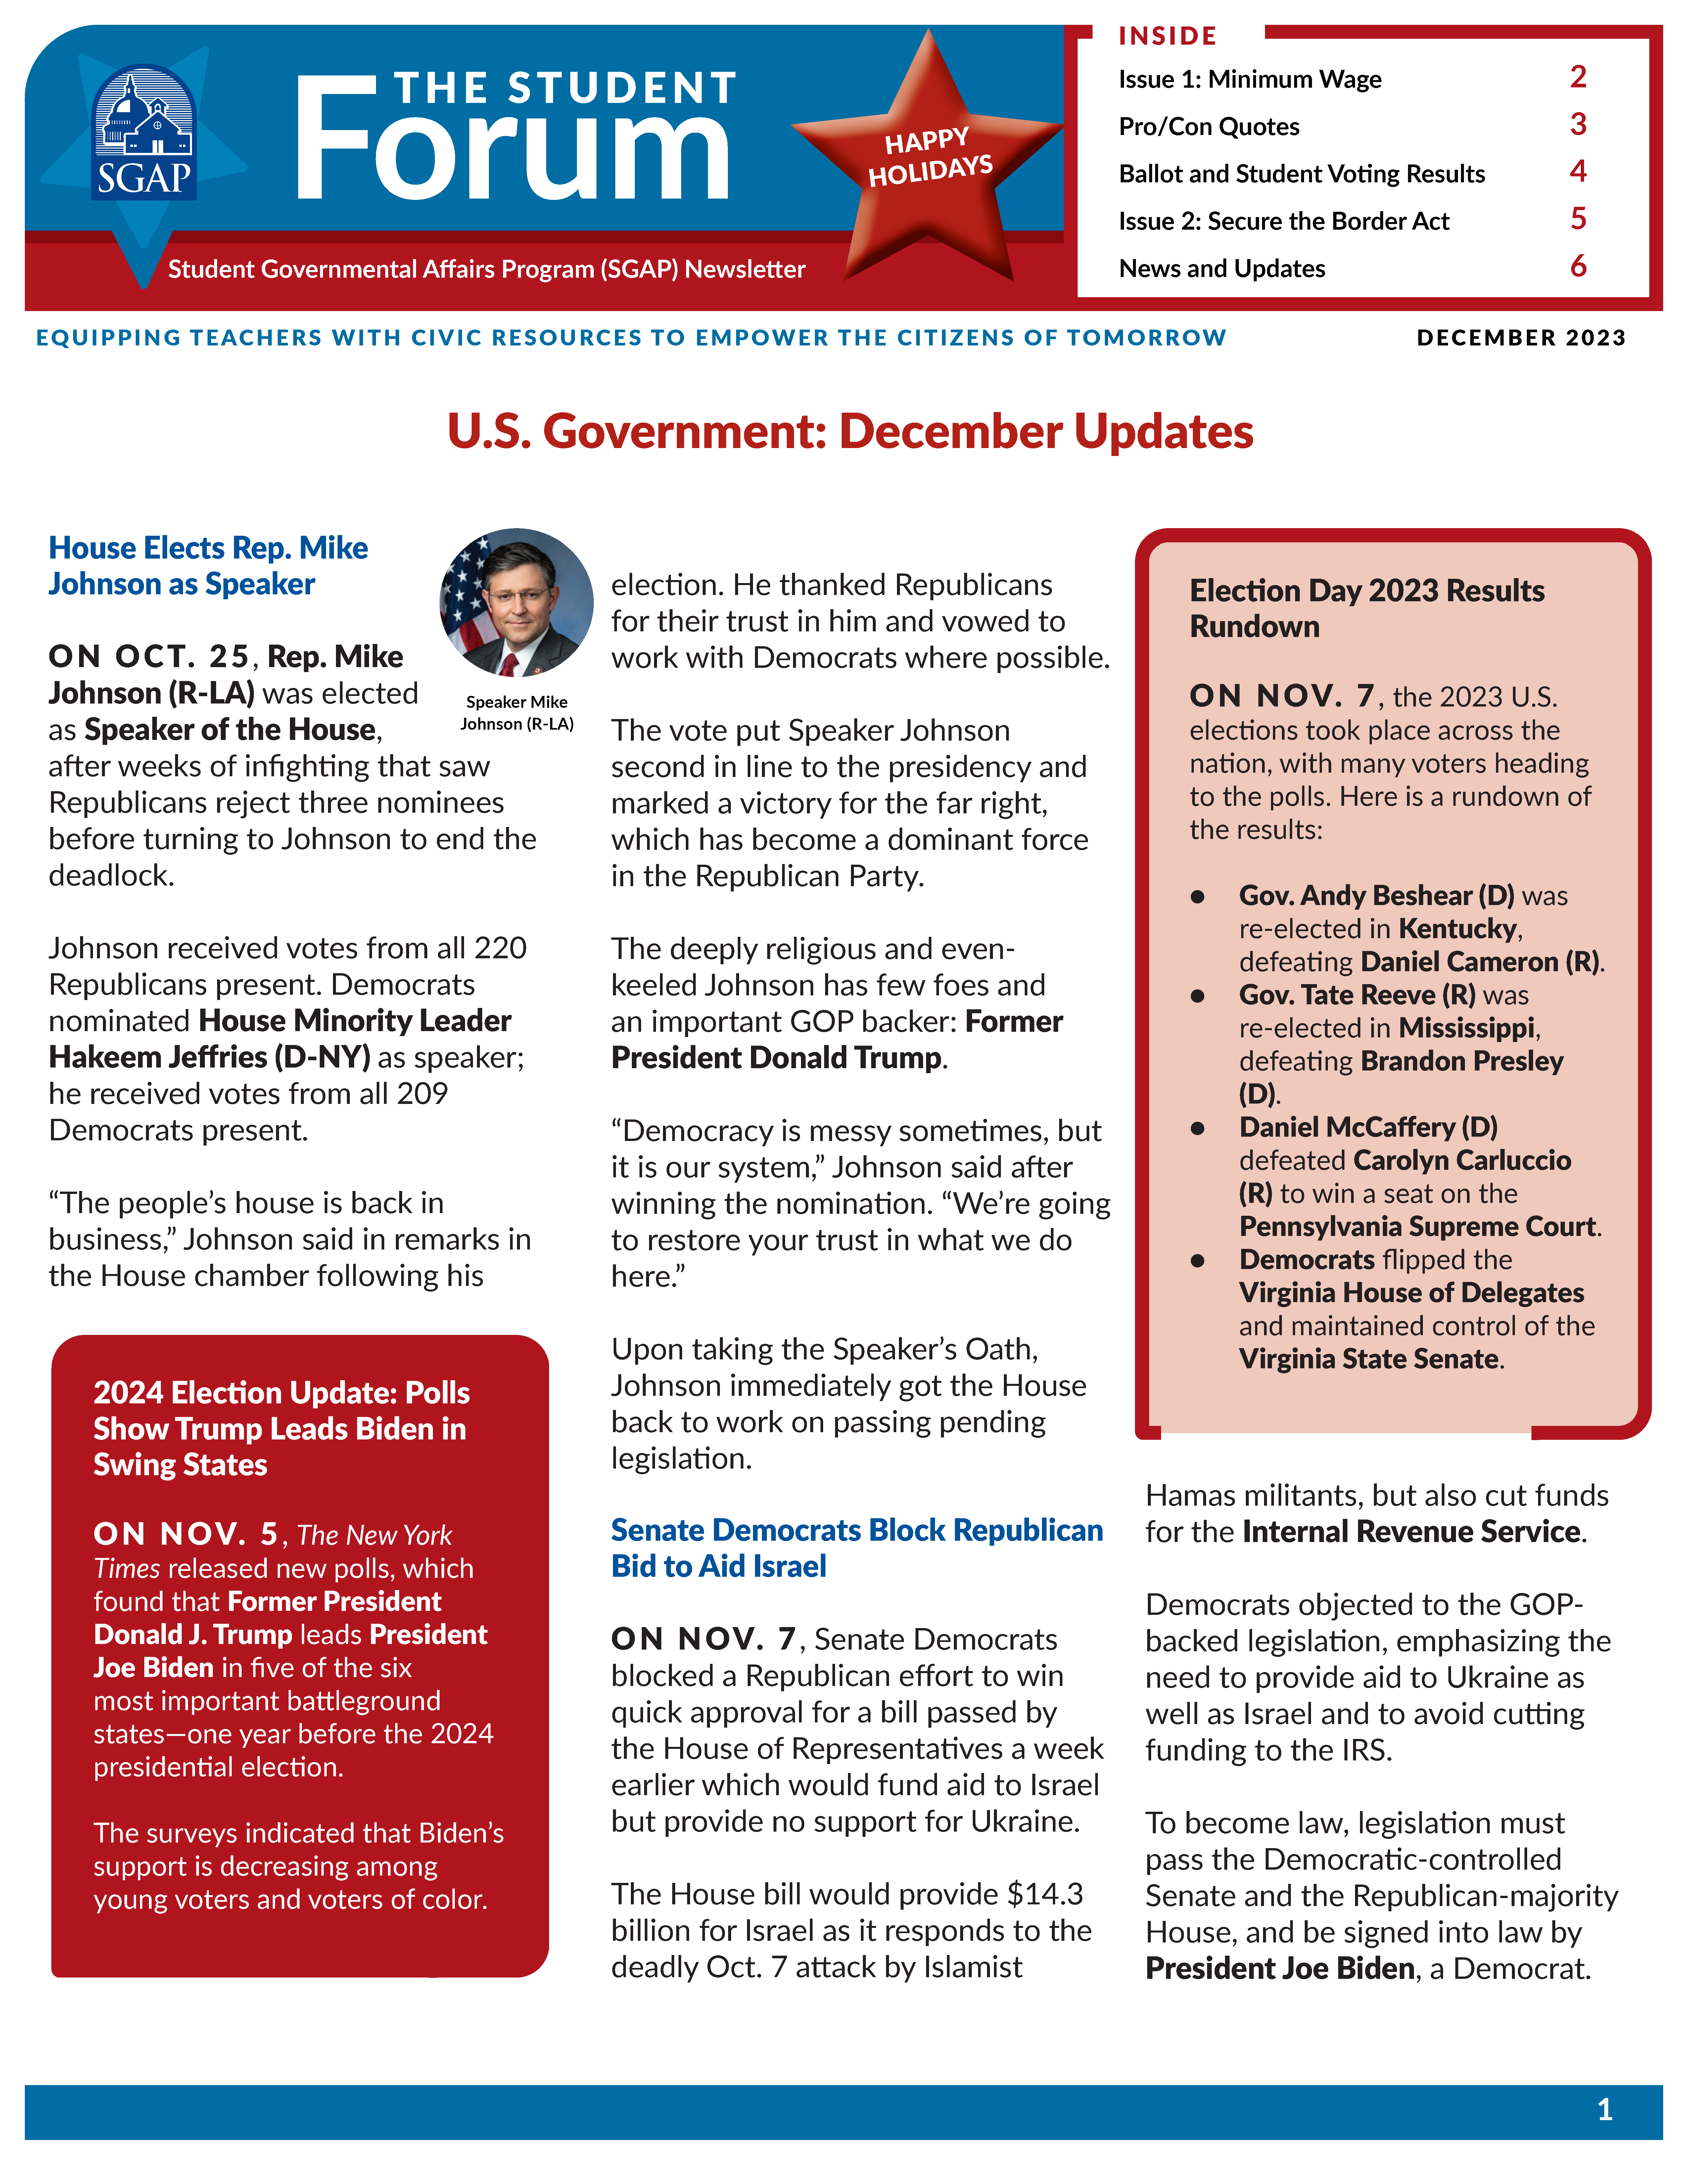 SGAP Newsletter for December 2023 (Minimum Wage + Secure the Border Act)